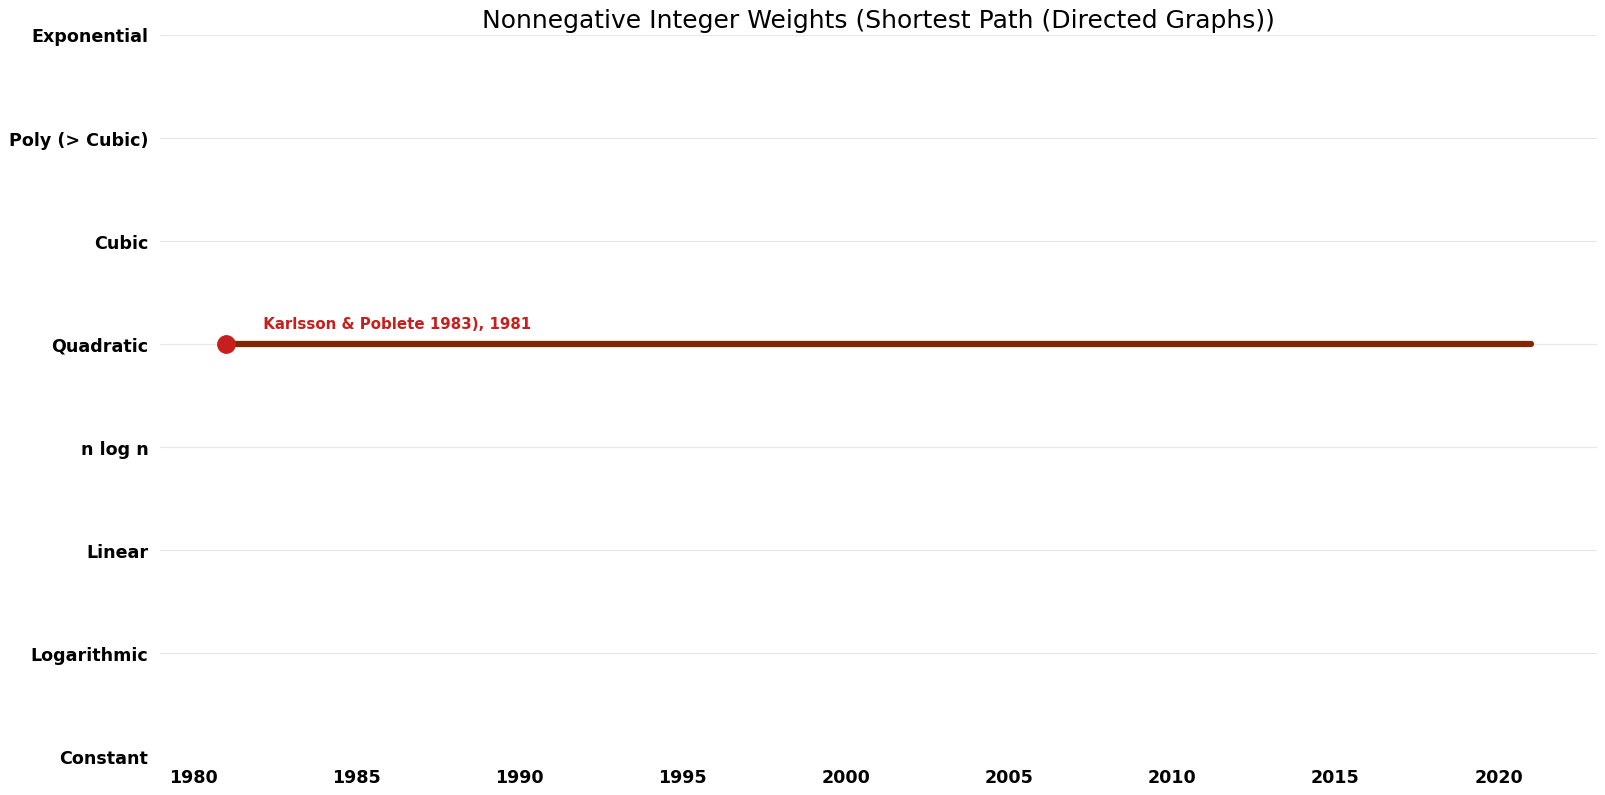 Shortest Path (Directed Graphs) - Nonnegative Integer Weights - Time.png